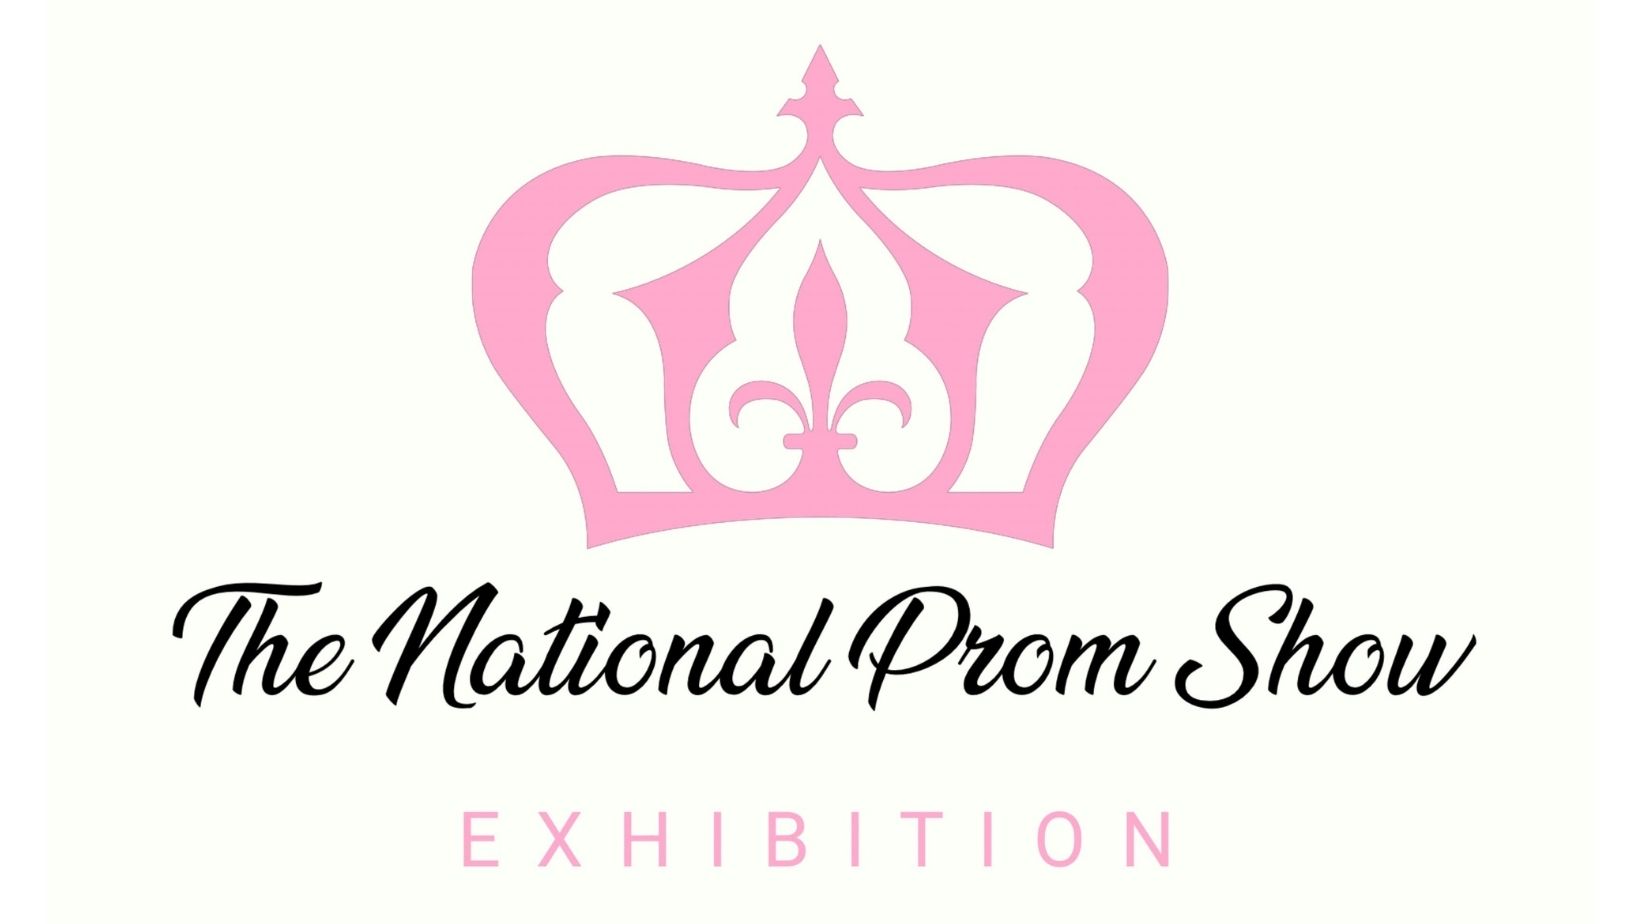 The National Prom Show